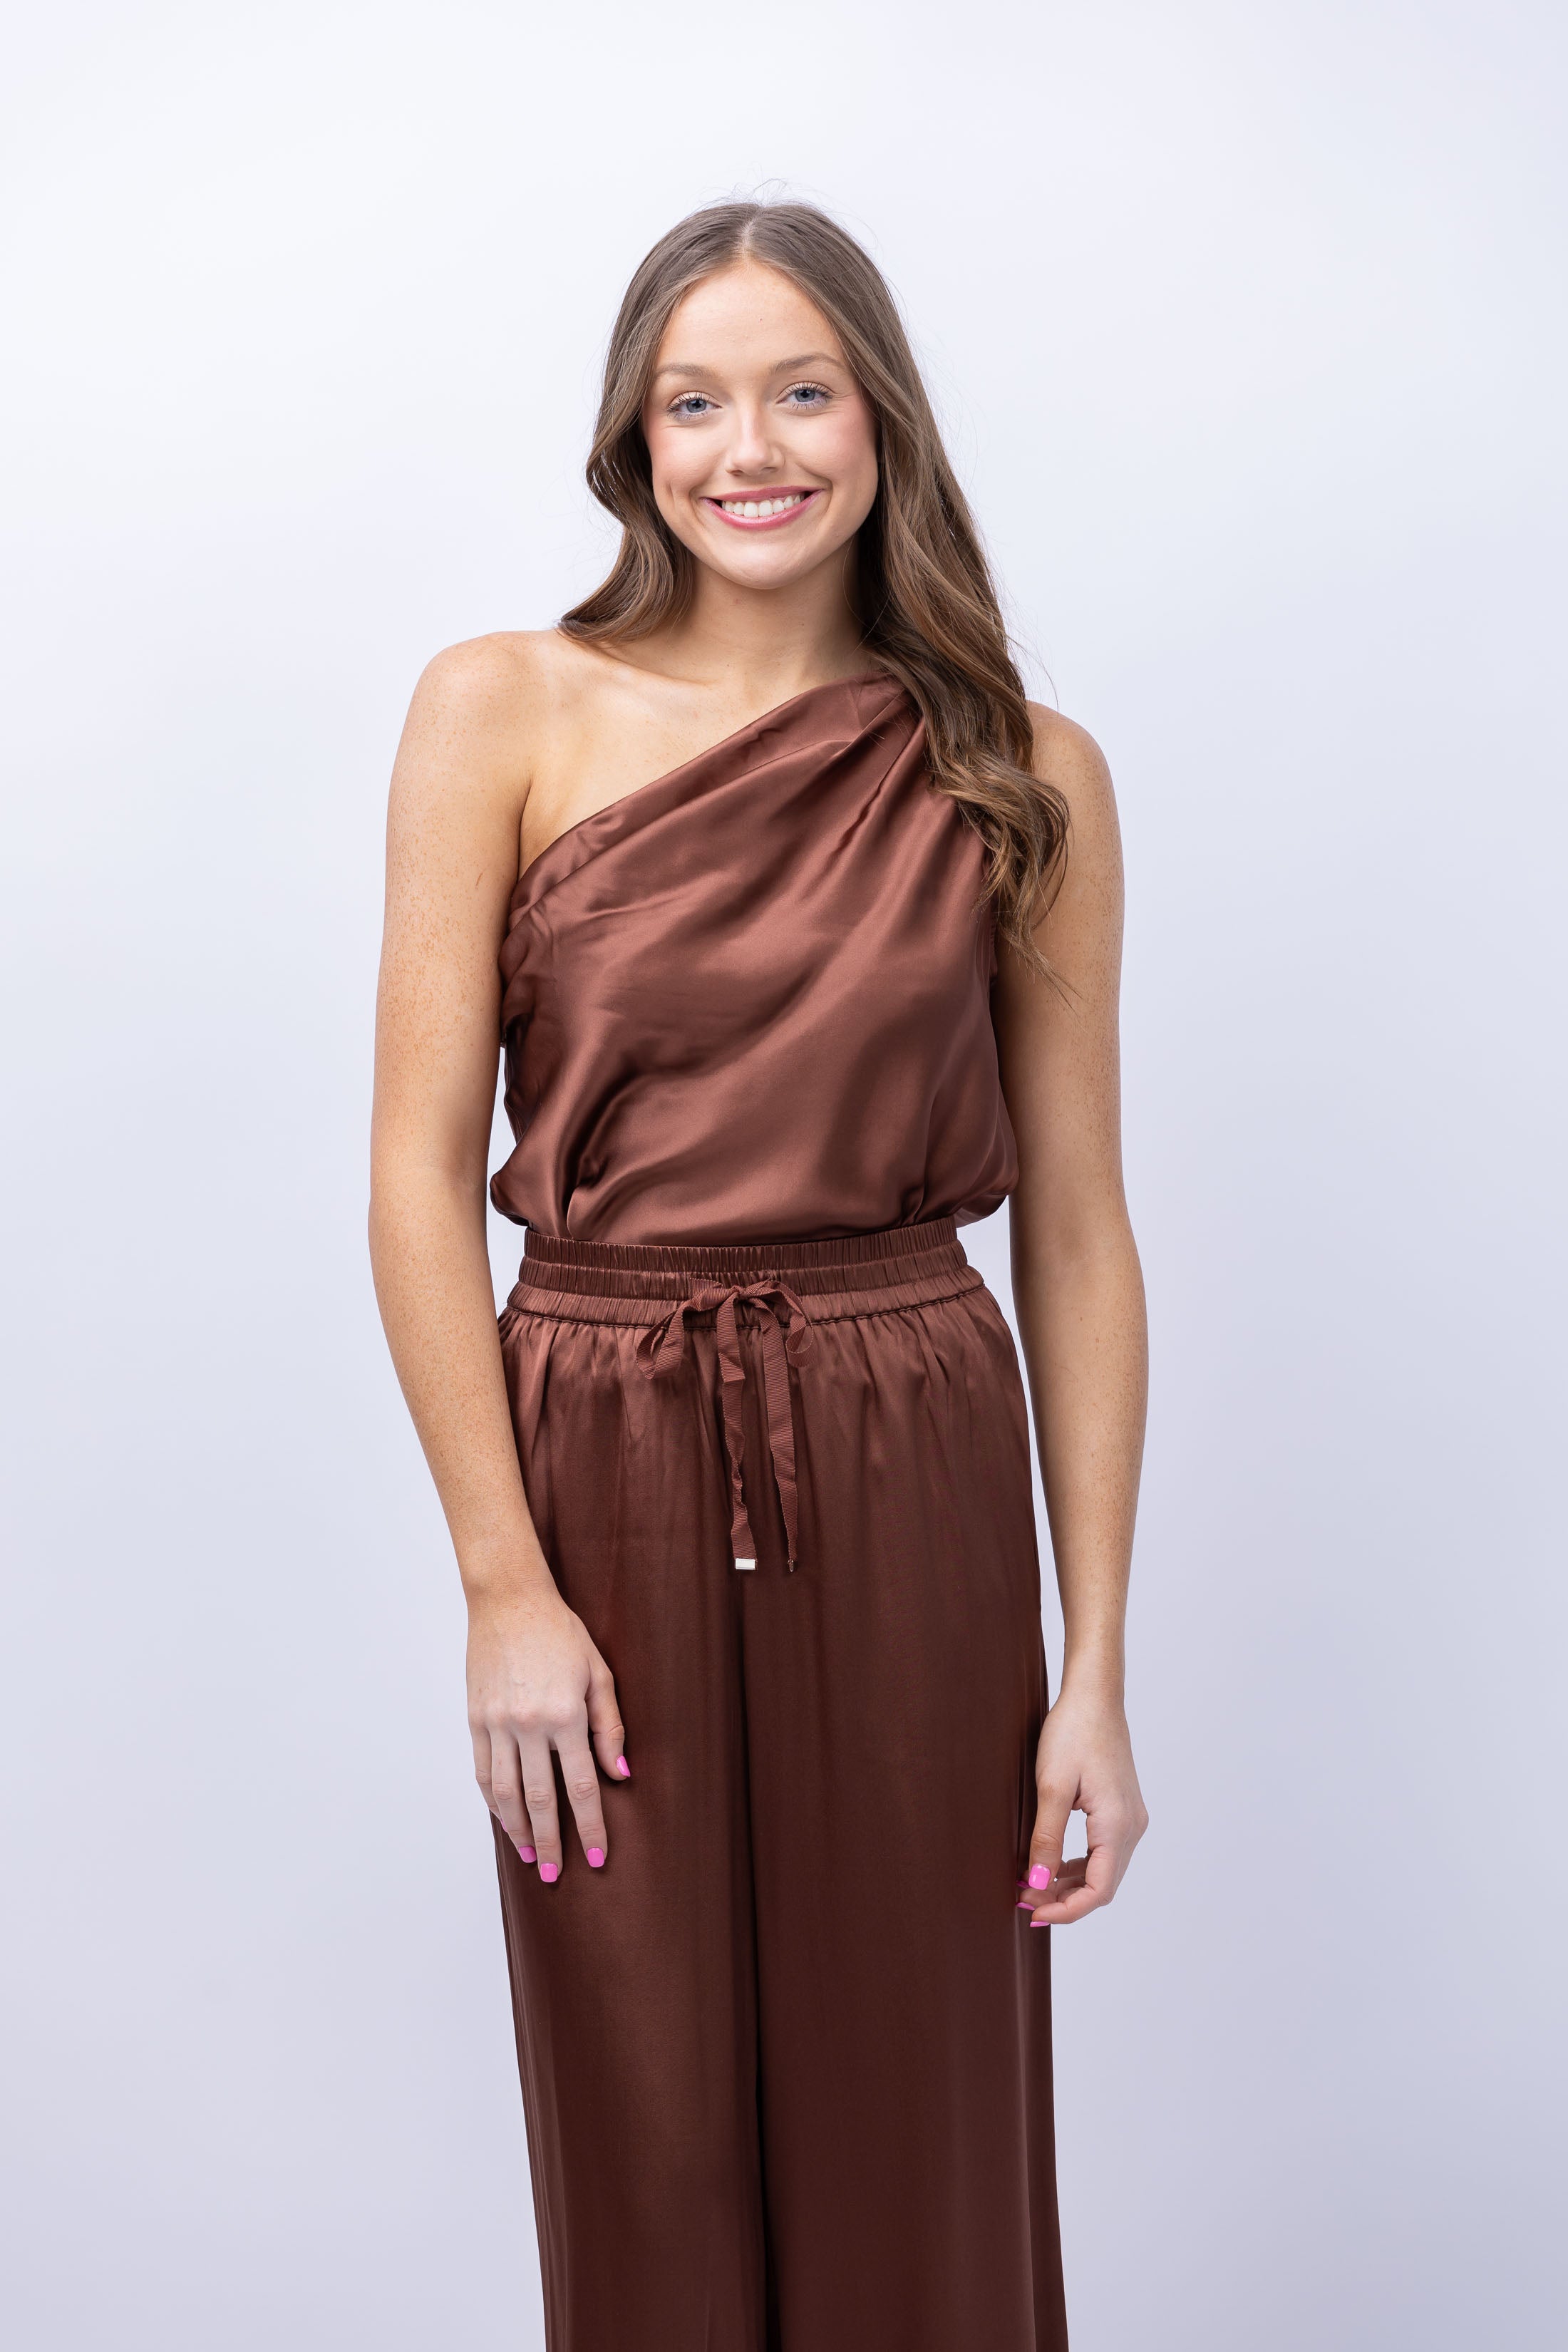 Cami NYC Darby Bodysuit in Coffee